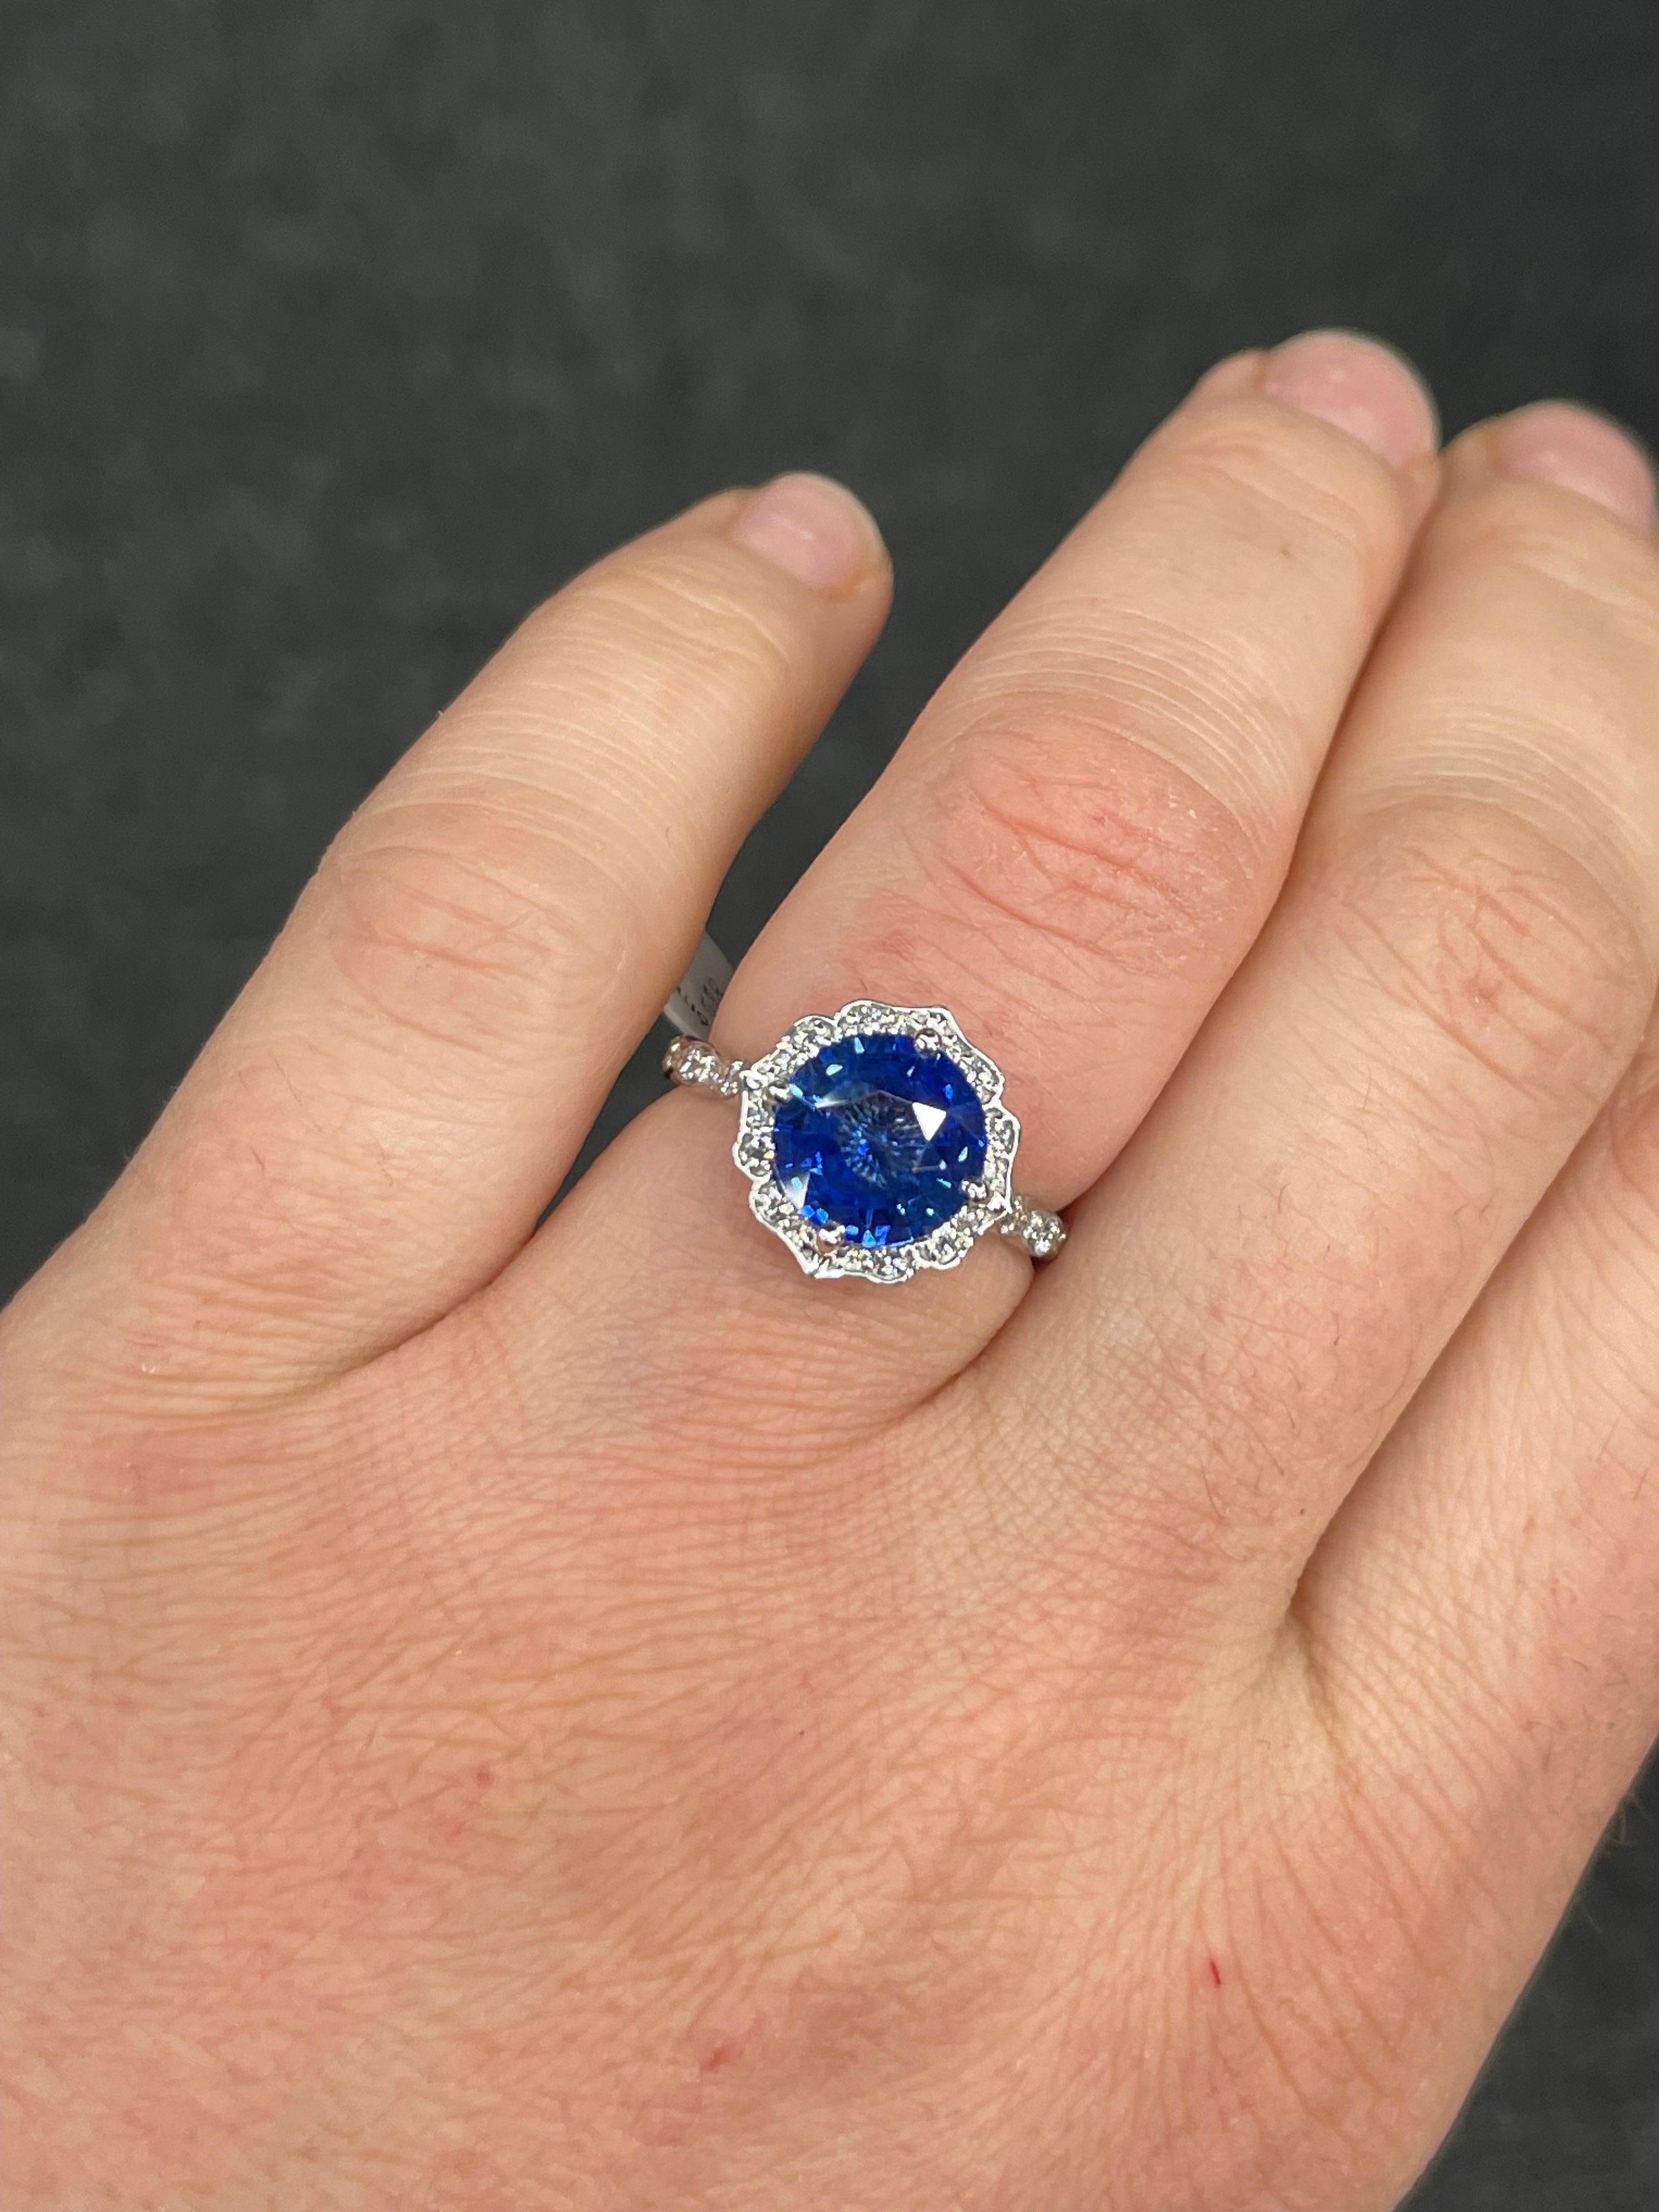 Antique Inspired Sapphire Diamond Halo Ring 4.07 Carats 14 Karat White Gold For Sale 8